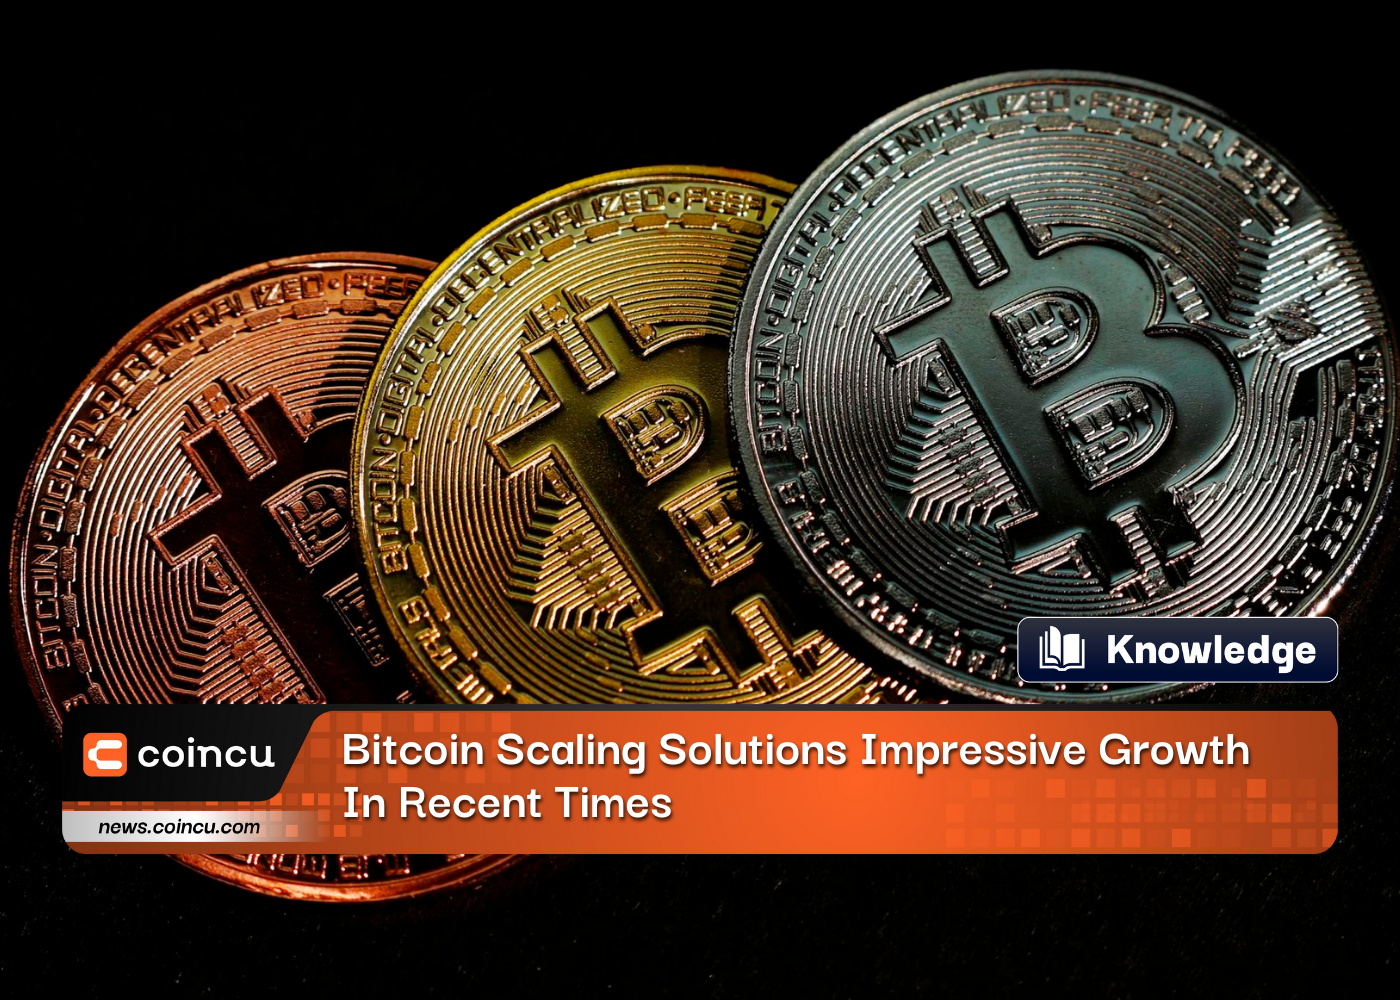 Let's Take A Look At Bitcoin Scaling Solutions Impressive Growth In Recent Times